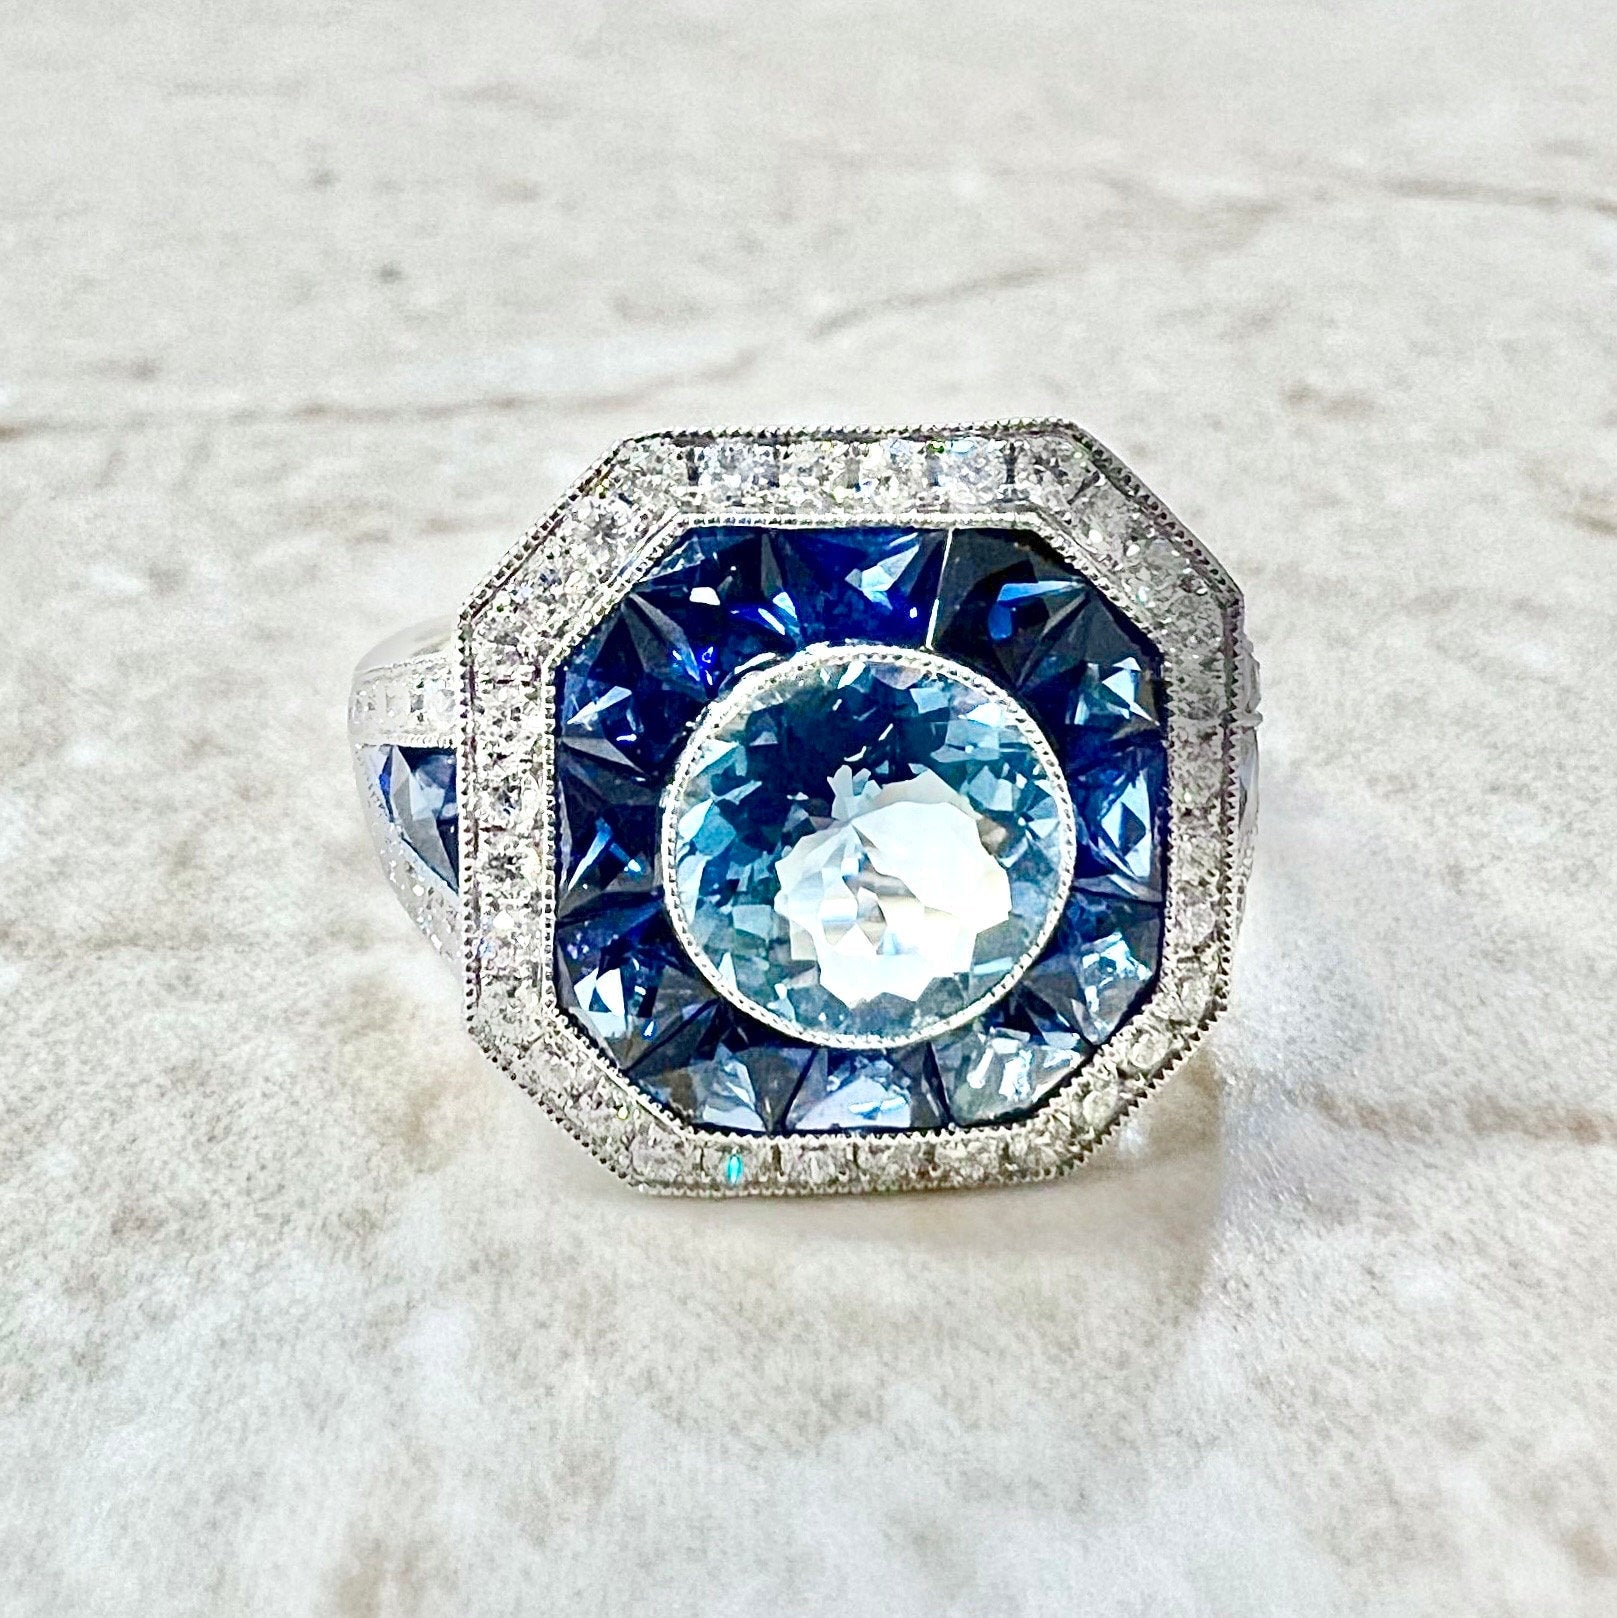 Very Fine Handcrafted Platinum Art Deco Style Aquamarine, Sapphire & Diamond Halo Ring - Engagement Ring - Promise Ring - Cocktail Ring